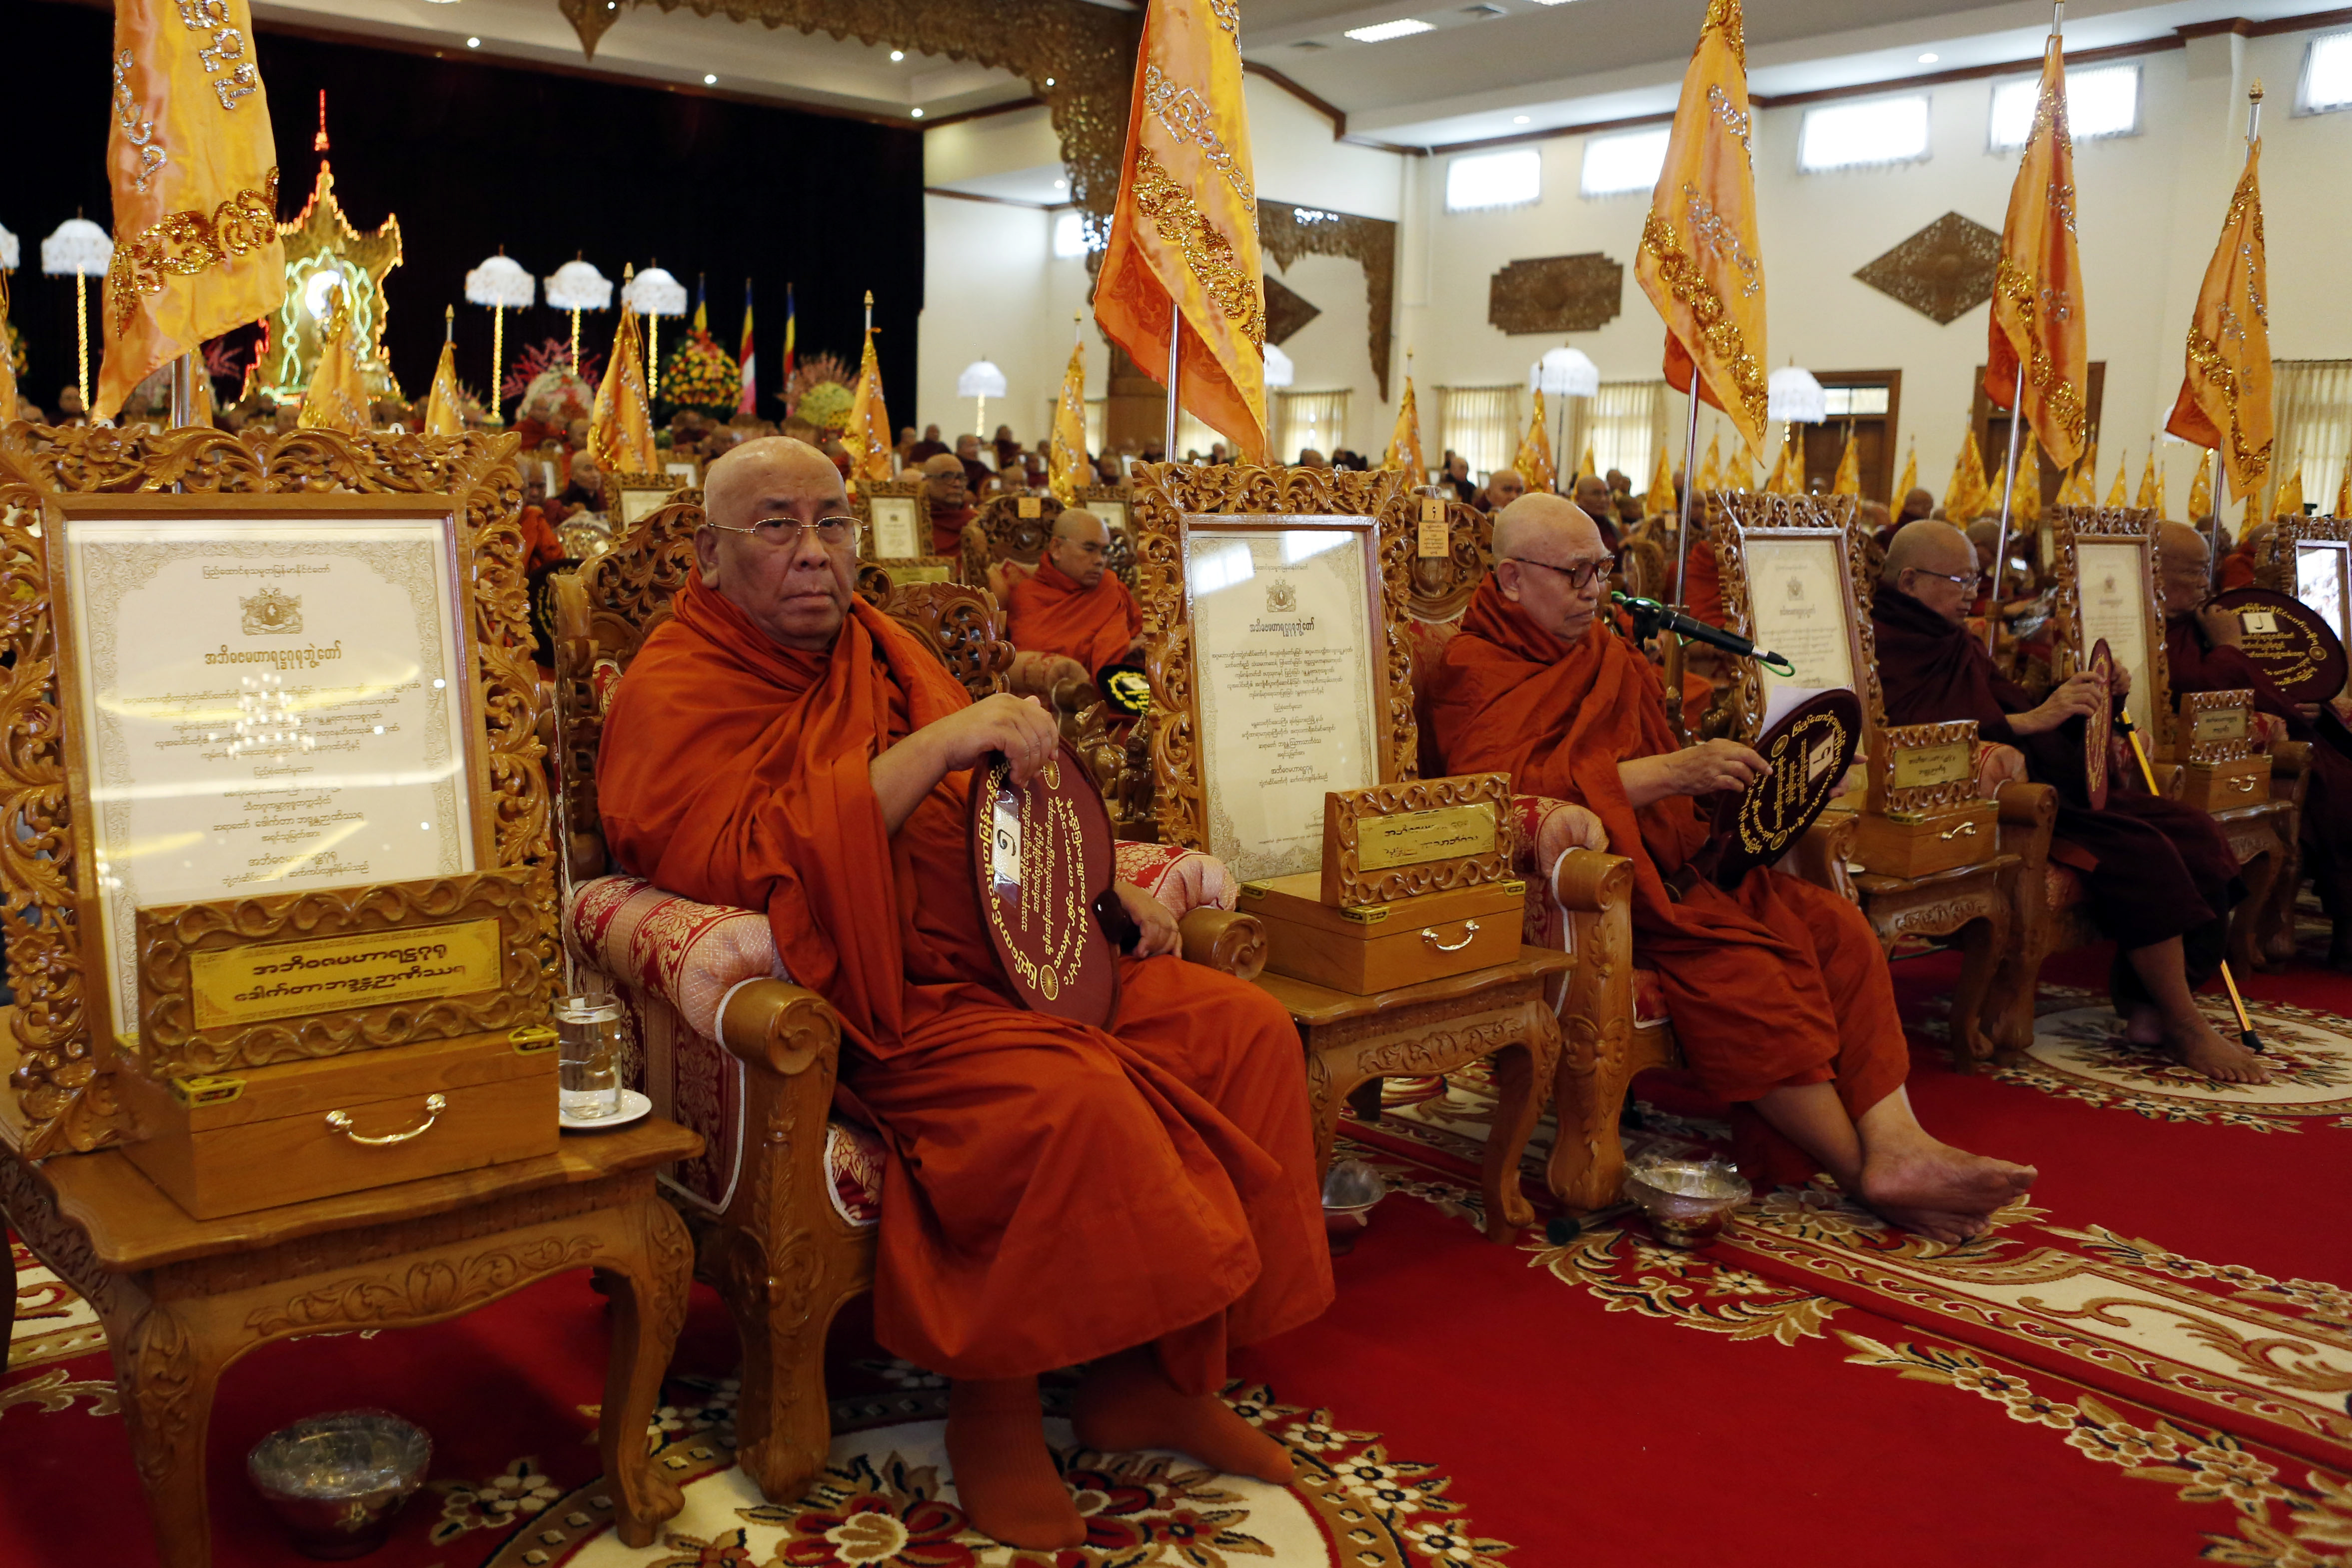 Prominent monk Sitagu Sayadaw in traditional saffron robes sits in a carved wooden seat at a lavish ceremony in Naypyidaw